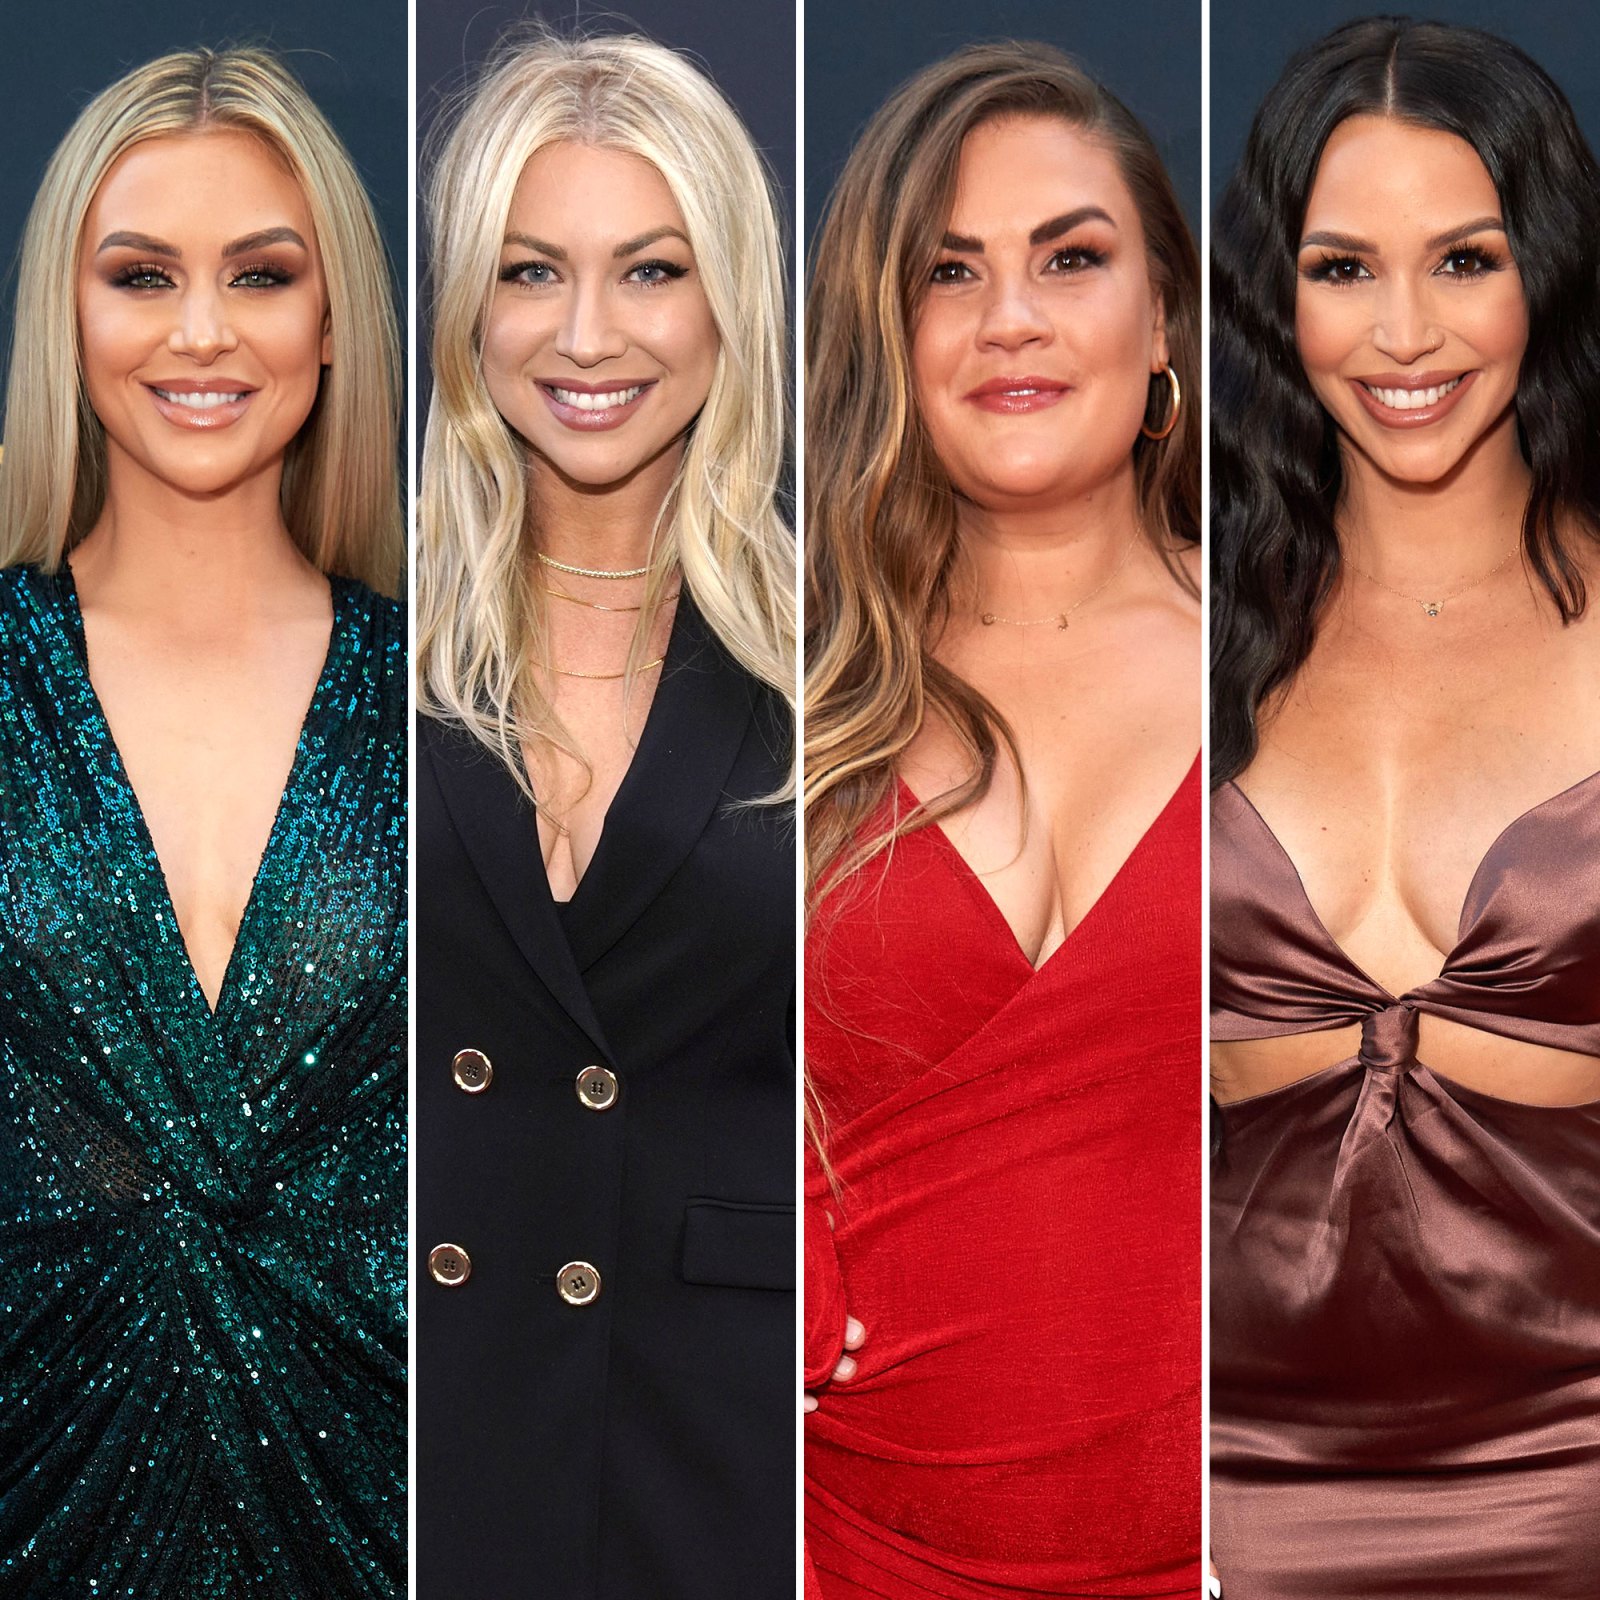 Lala Kent Stassi Schroeder Brittany Cartwright and Scheana Shay Reunite With 4 Babies for 1st Time